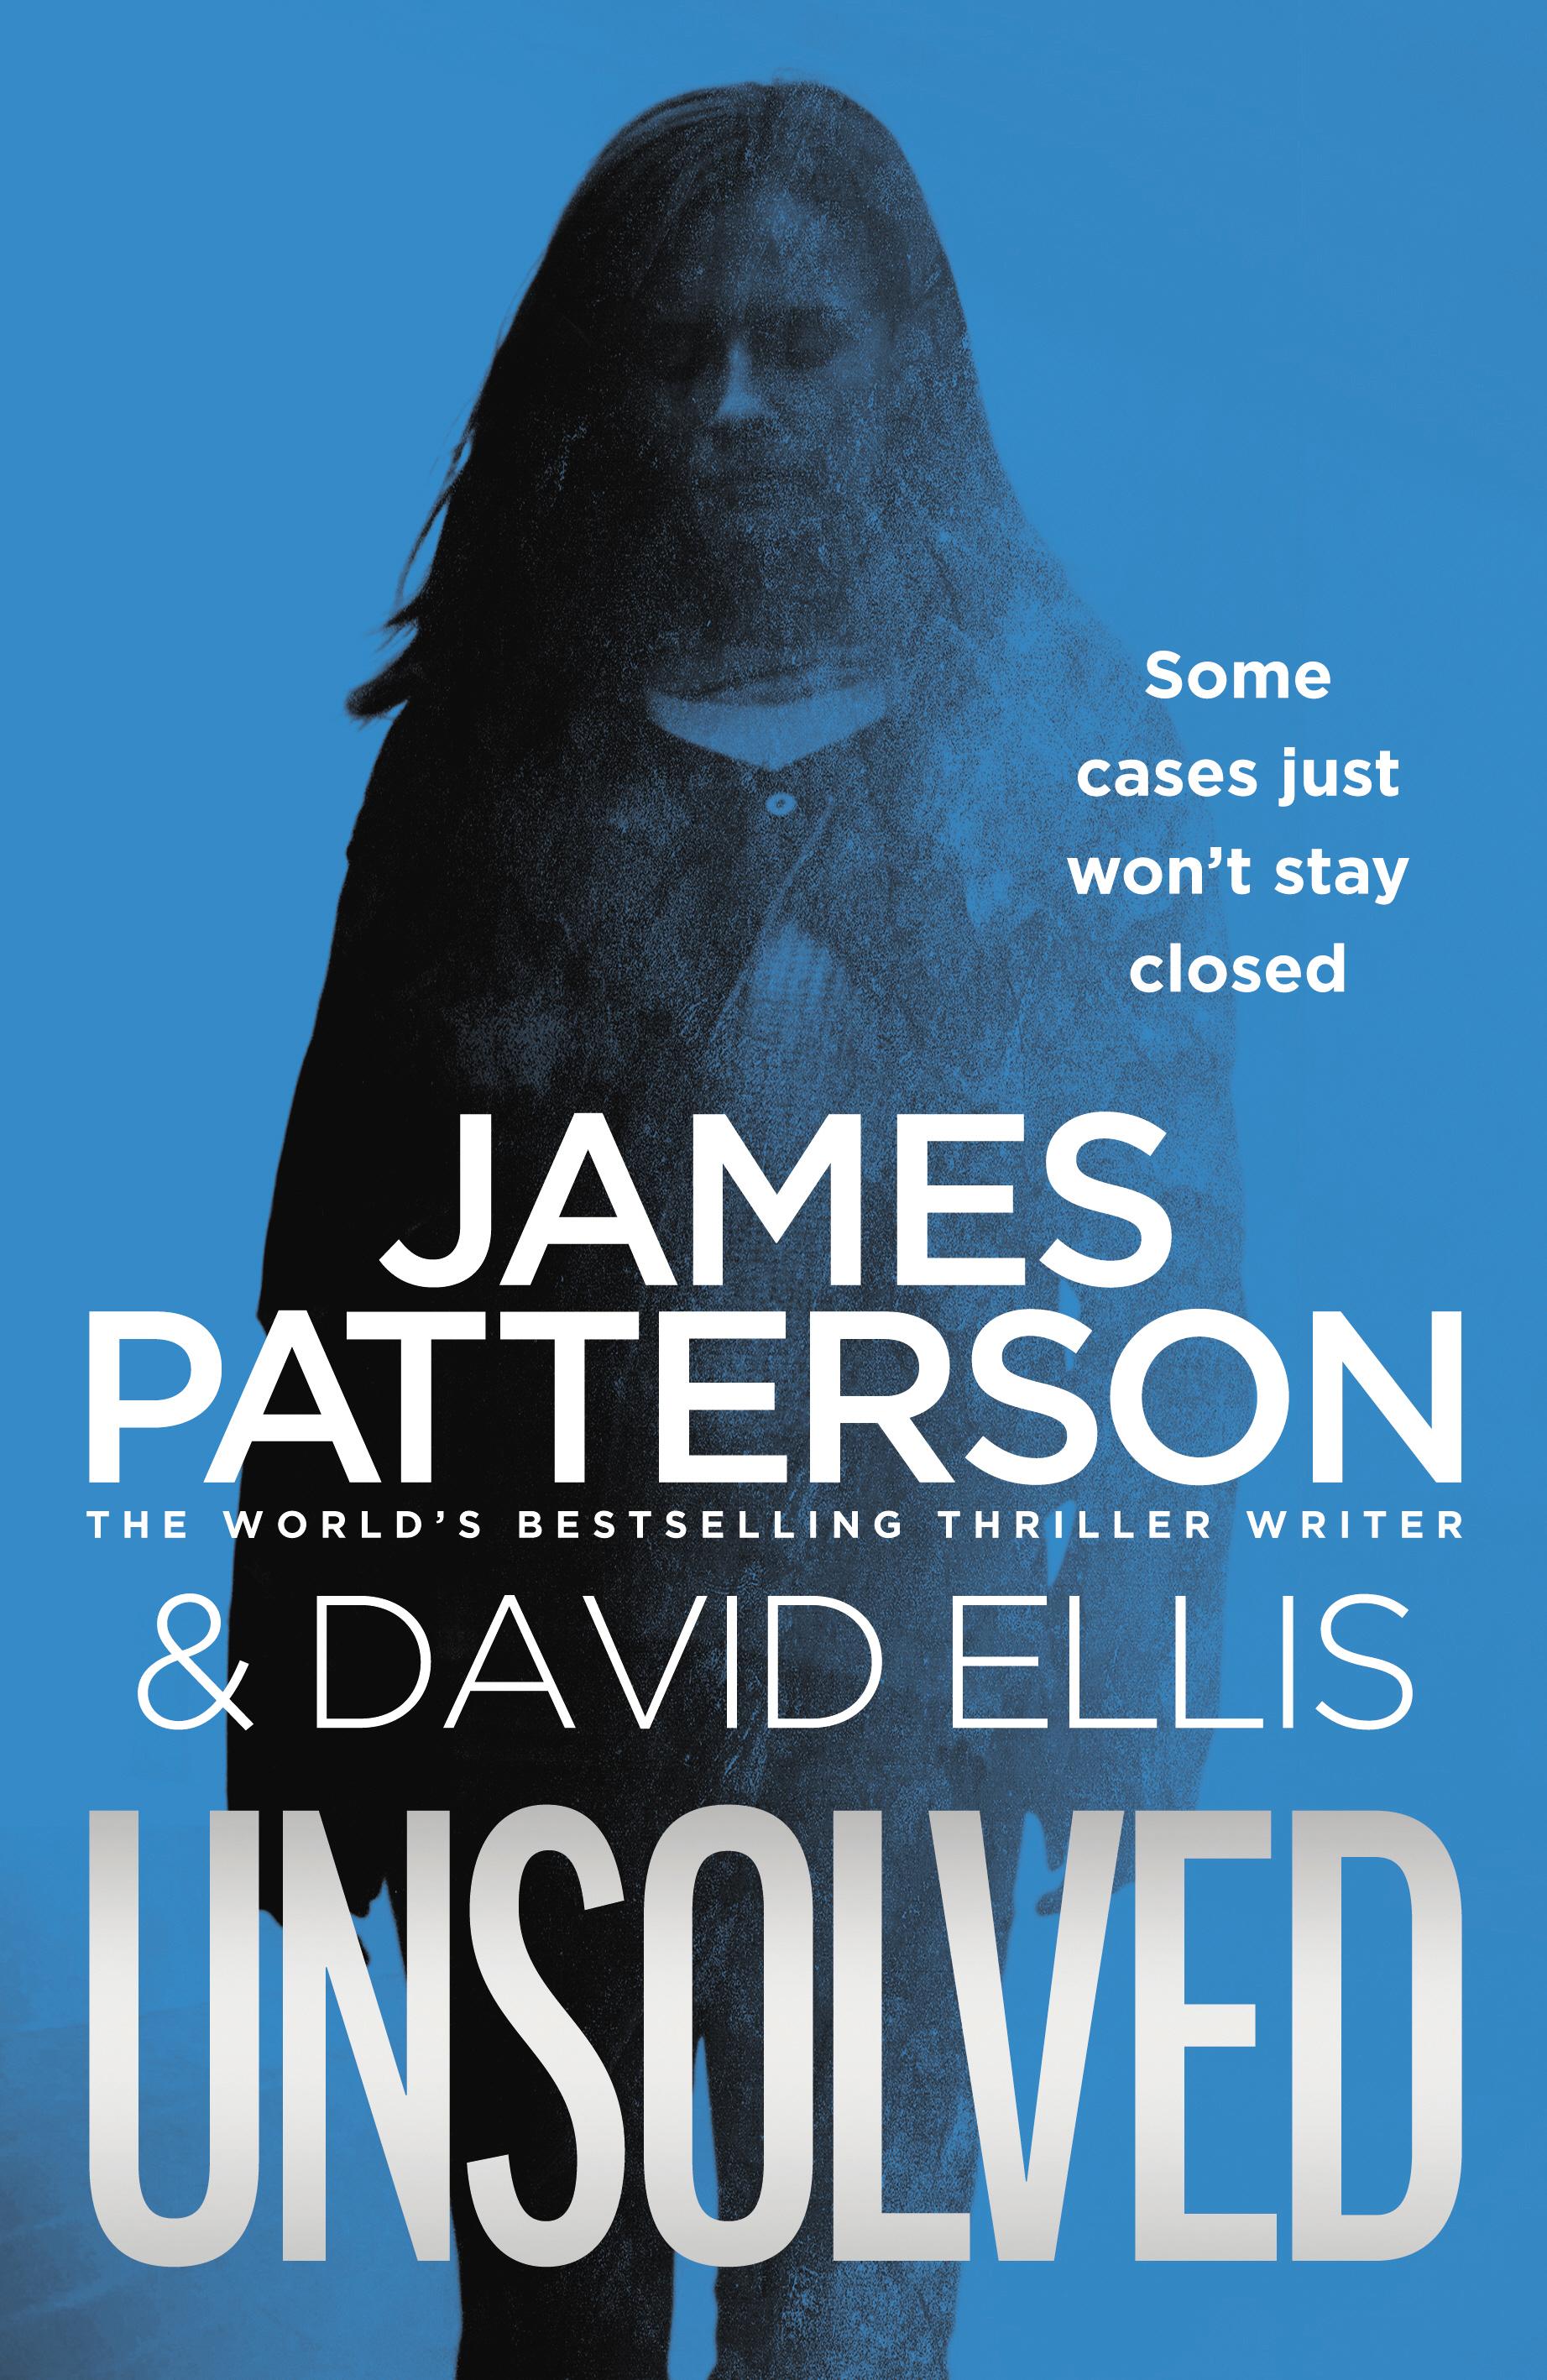 Unsolved - James Patterson